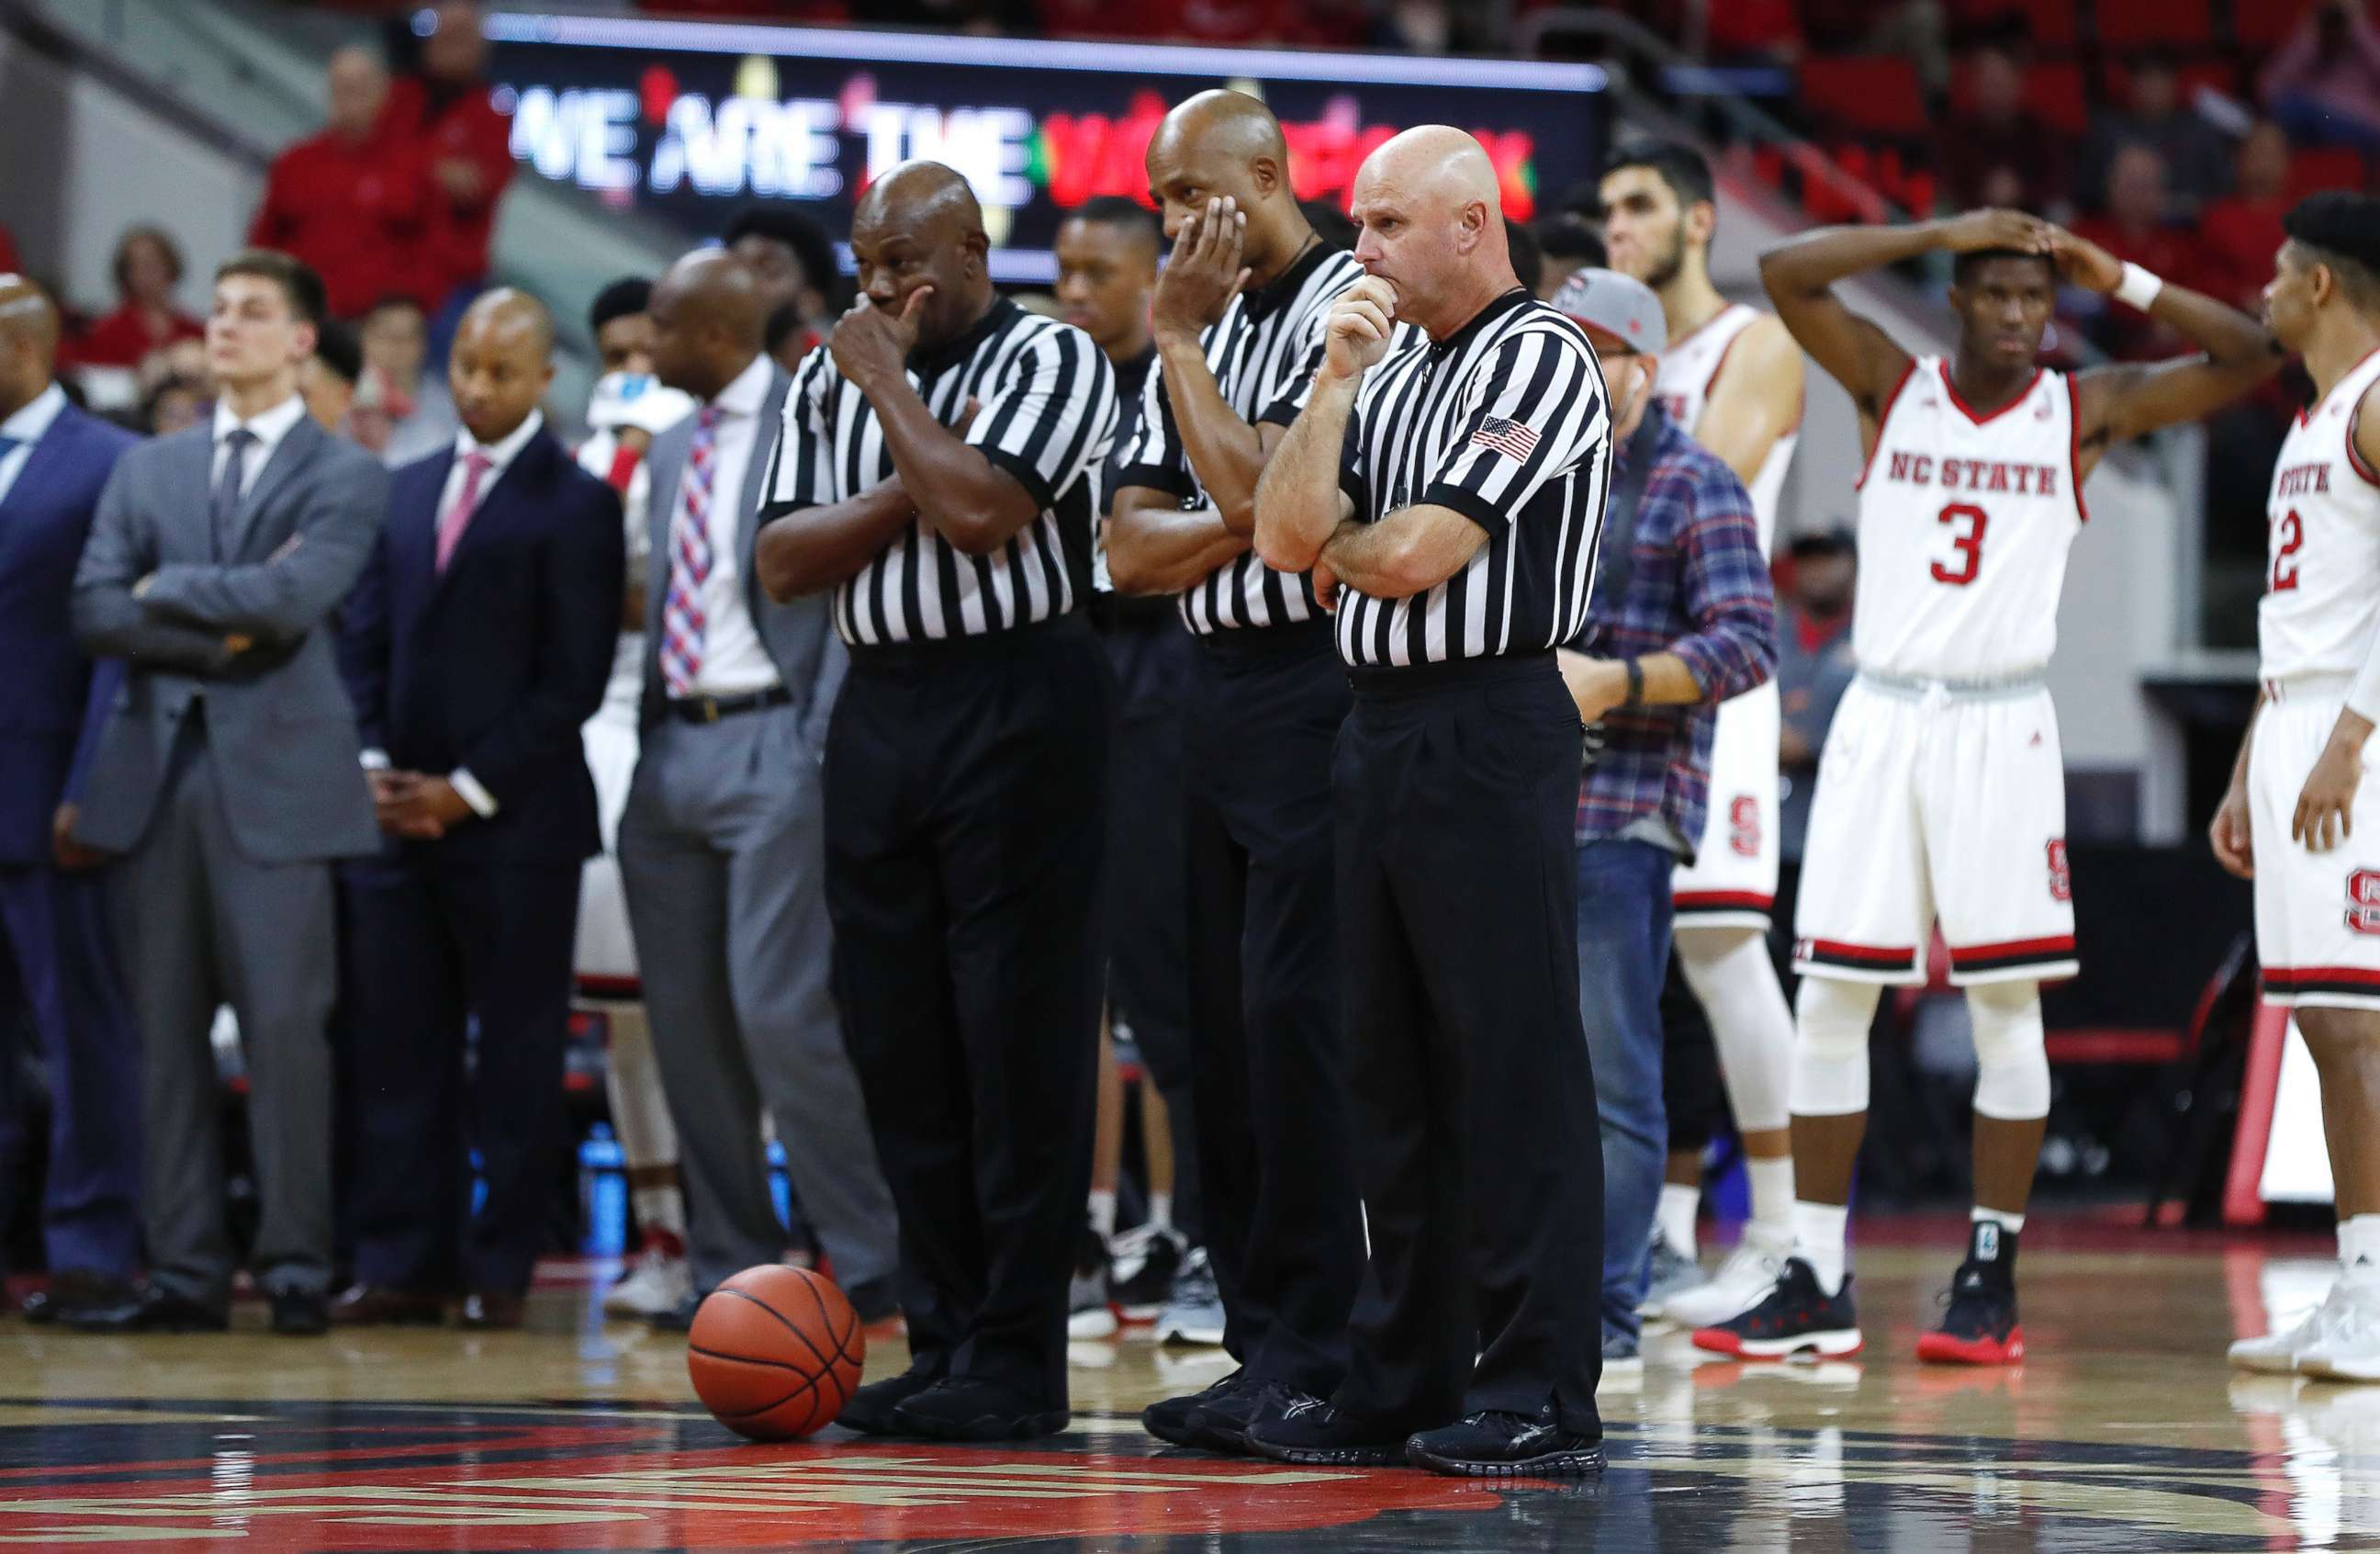 PHOTO: Game 0fficials including from left, Les Jones, Bert Smith and Tim Comer, watch as South Carolina State's Tyvoris Solomon is attended to after he was injured during an NCAA college basketball at PNC Arena in Raleigh, N.C., Dec. 2, 2017.  